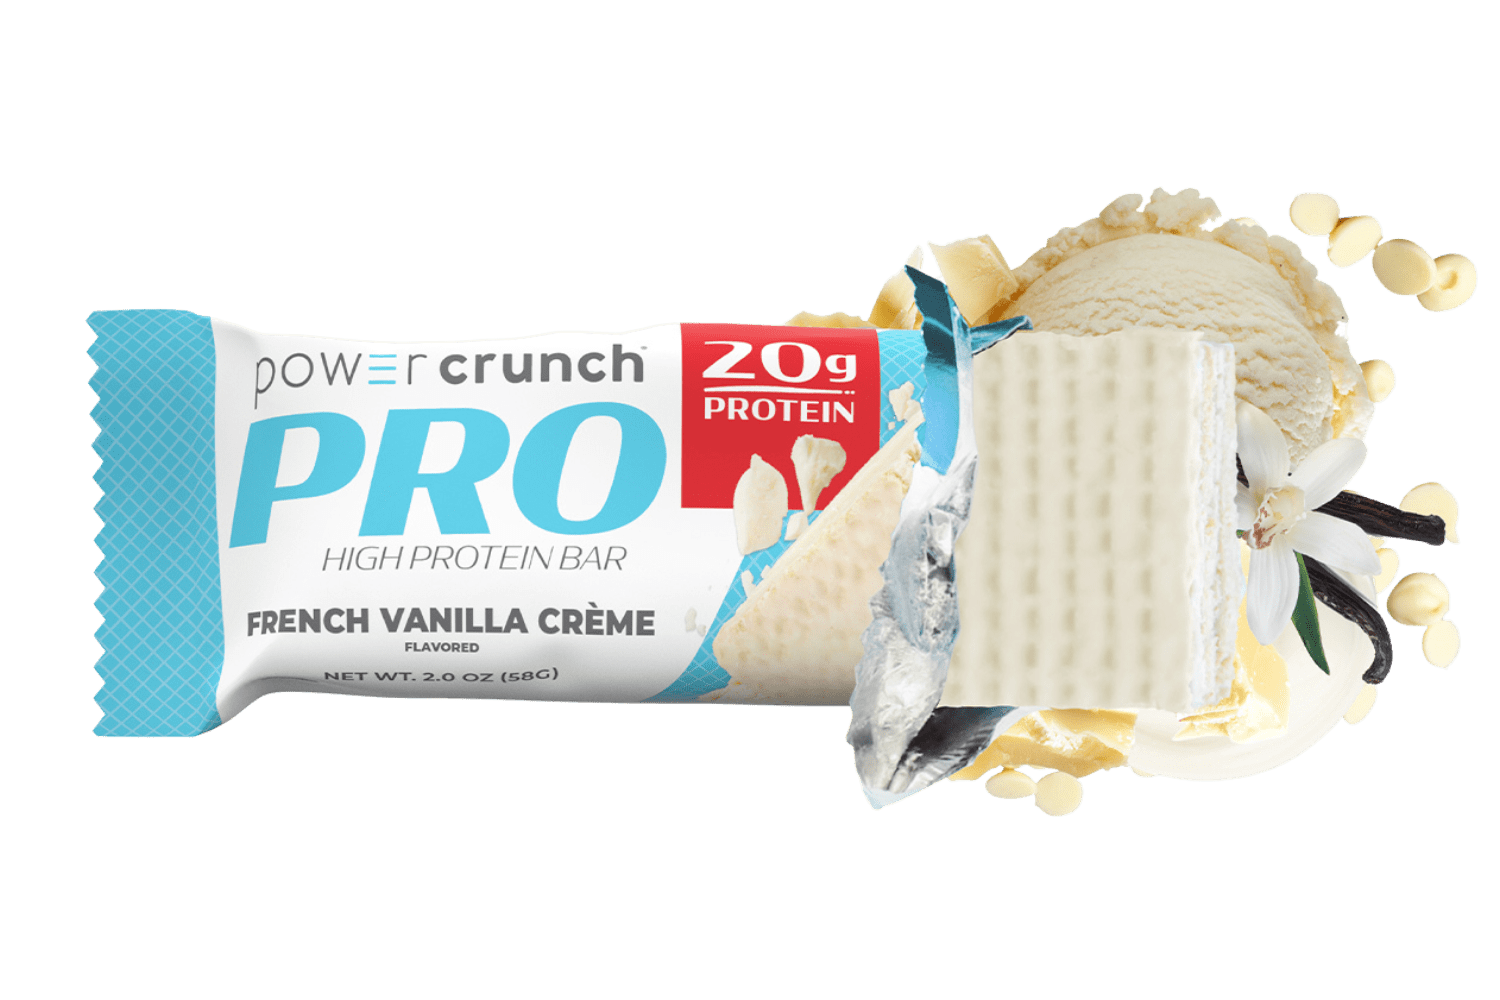 Power Crunch PRO French Vanilla 20g protein bars pictured with French Vanilla flavor explosion